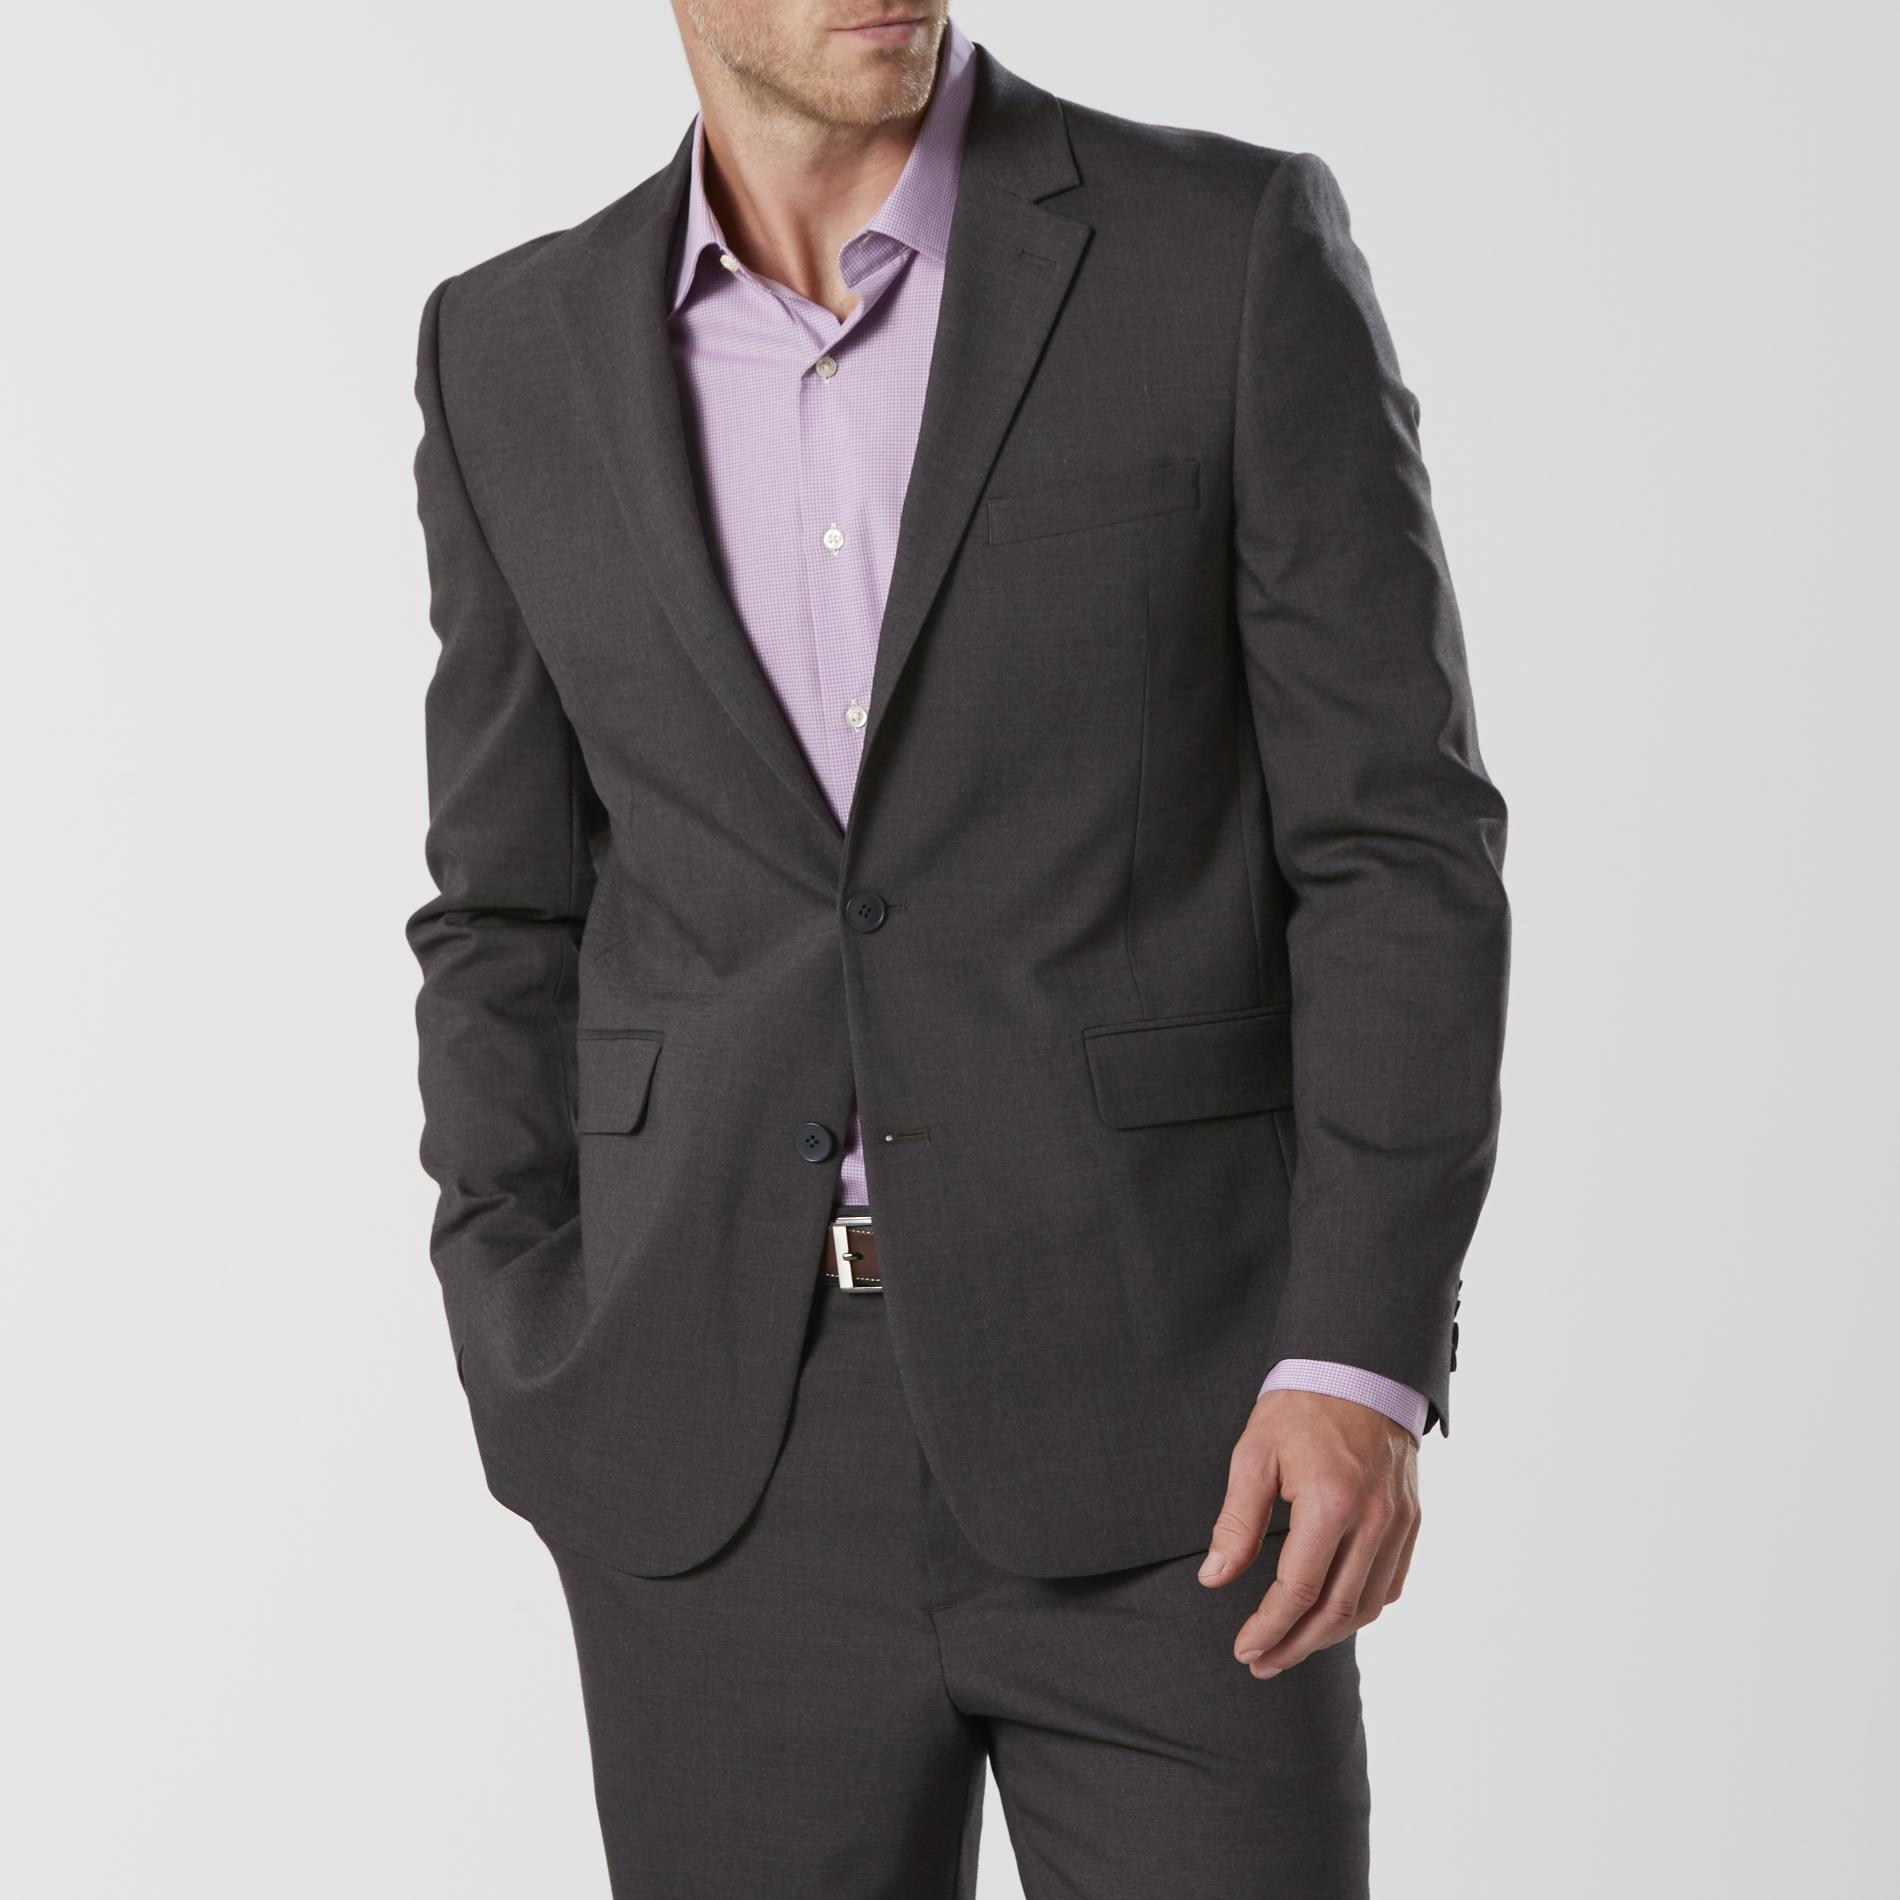 Structure Men's Modern Fit Suit Jacket - Heathered